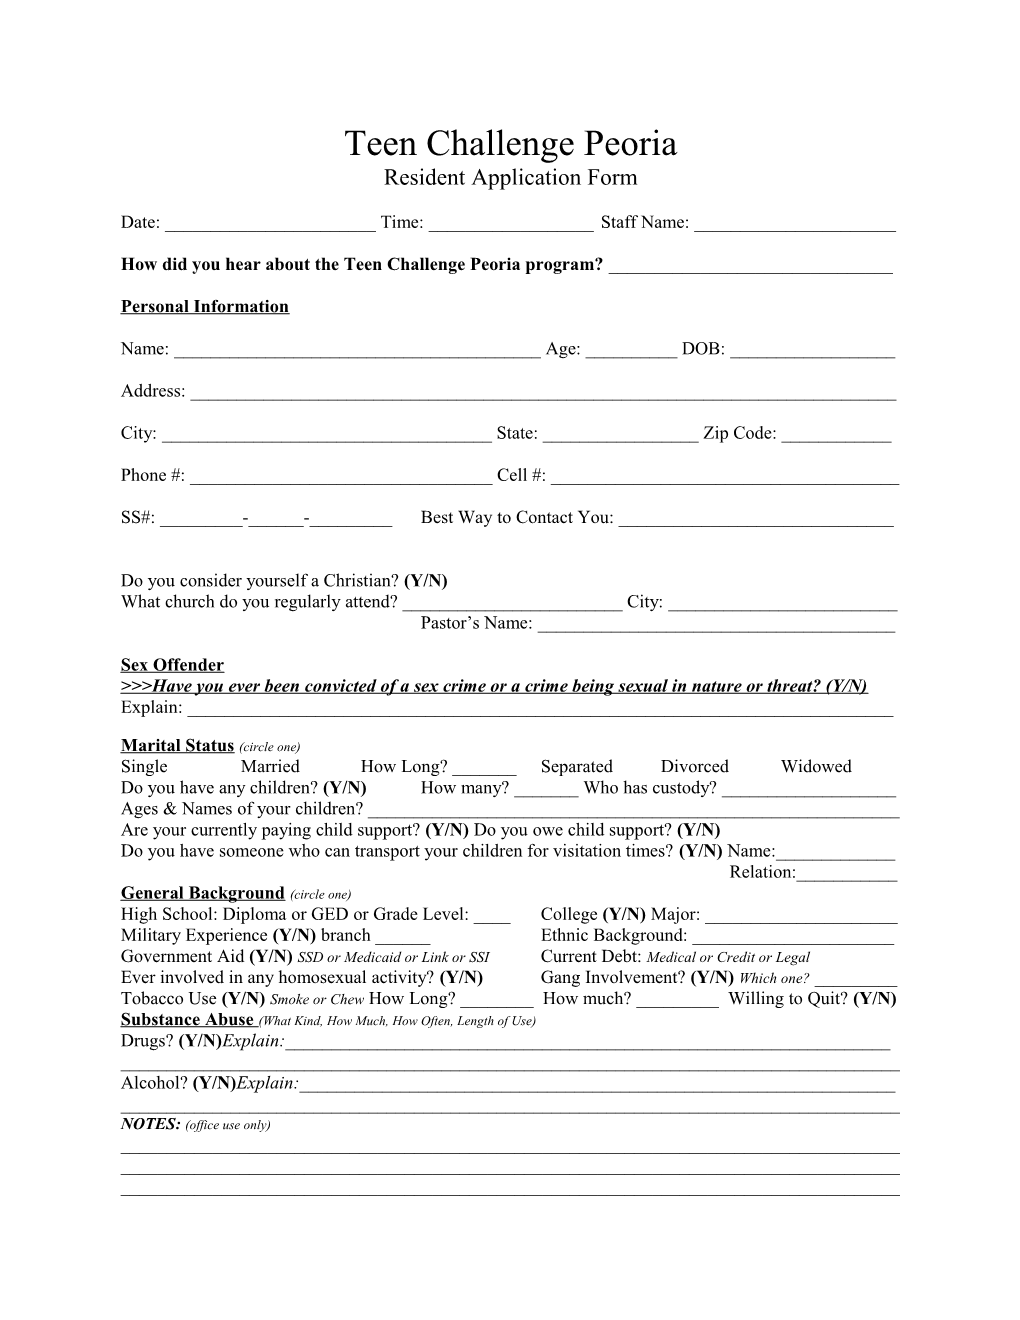 Resident Application Form